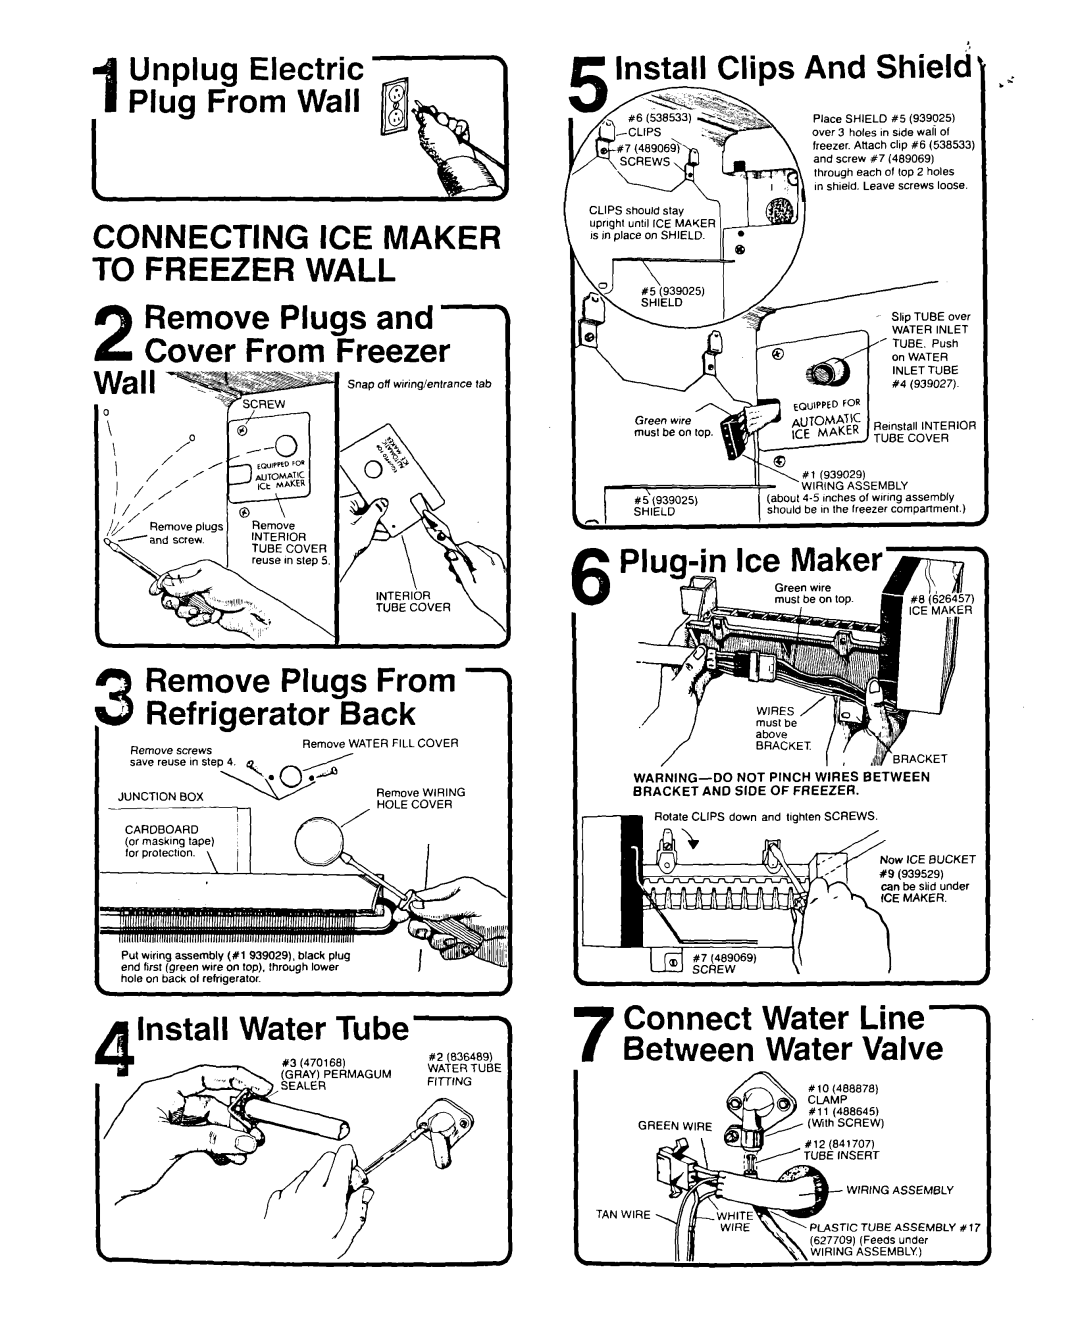 Whirlpool ECKMF-281 Unplug Electric Plug From Wall, Install Clips And Shield, Remove Plugs and, Cover From Freezer, Side 